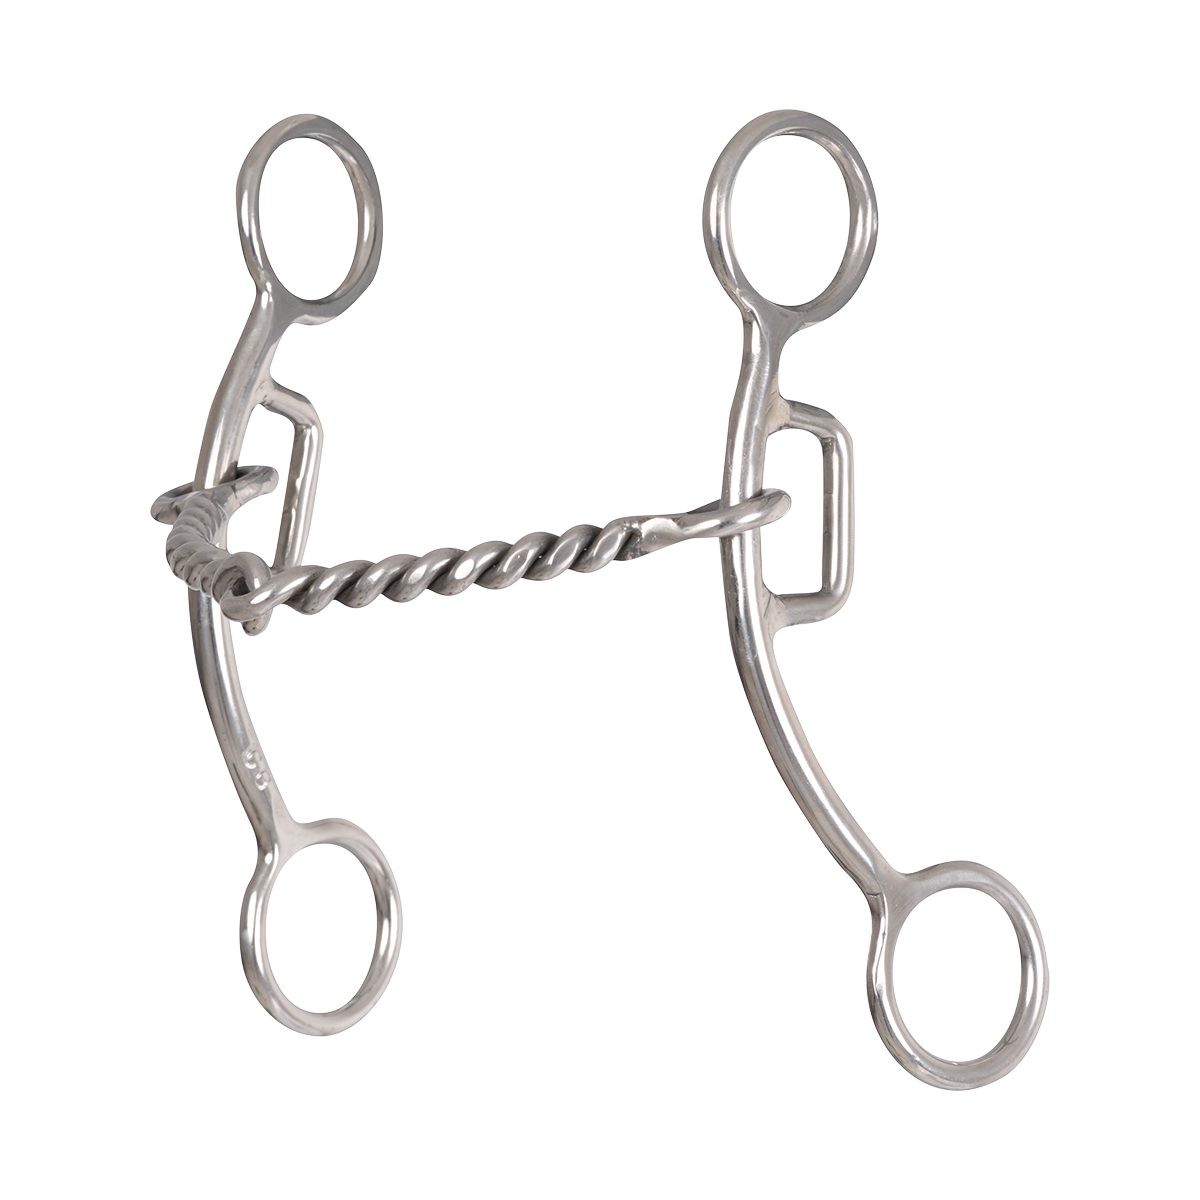 Goostree Delight Twisted Wire Snaffle Bit